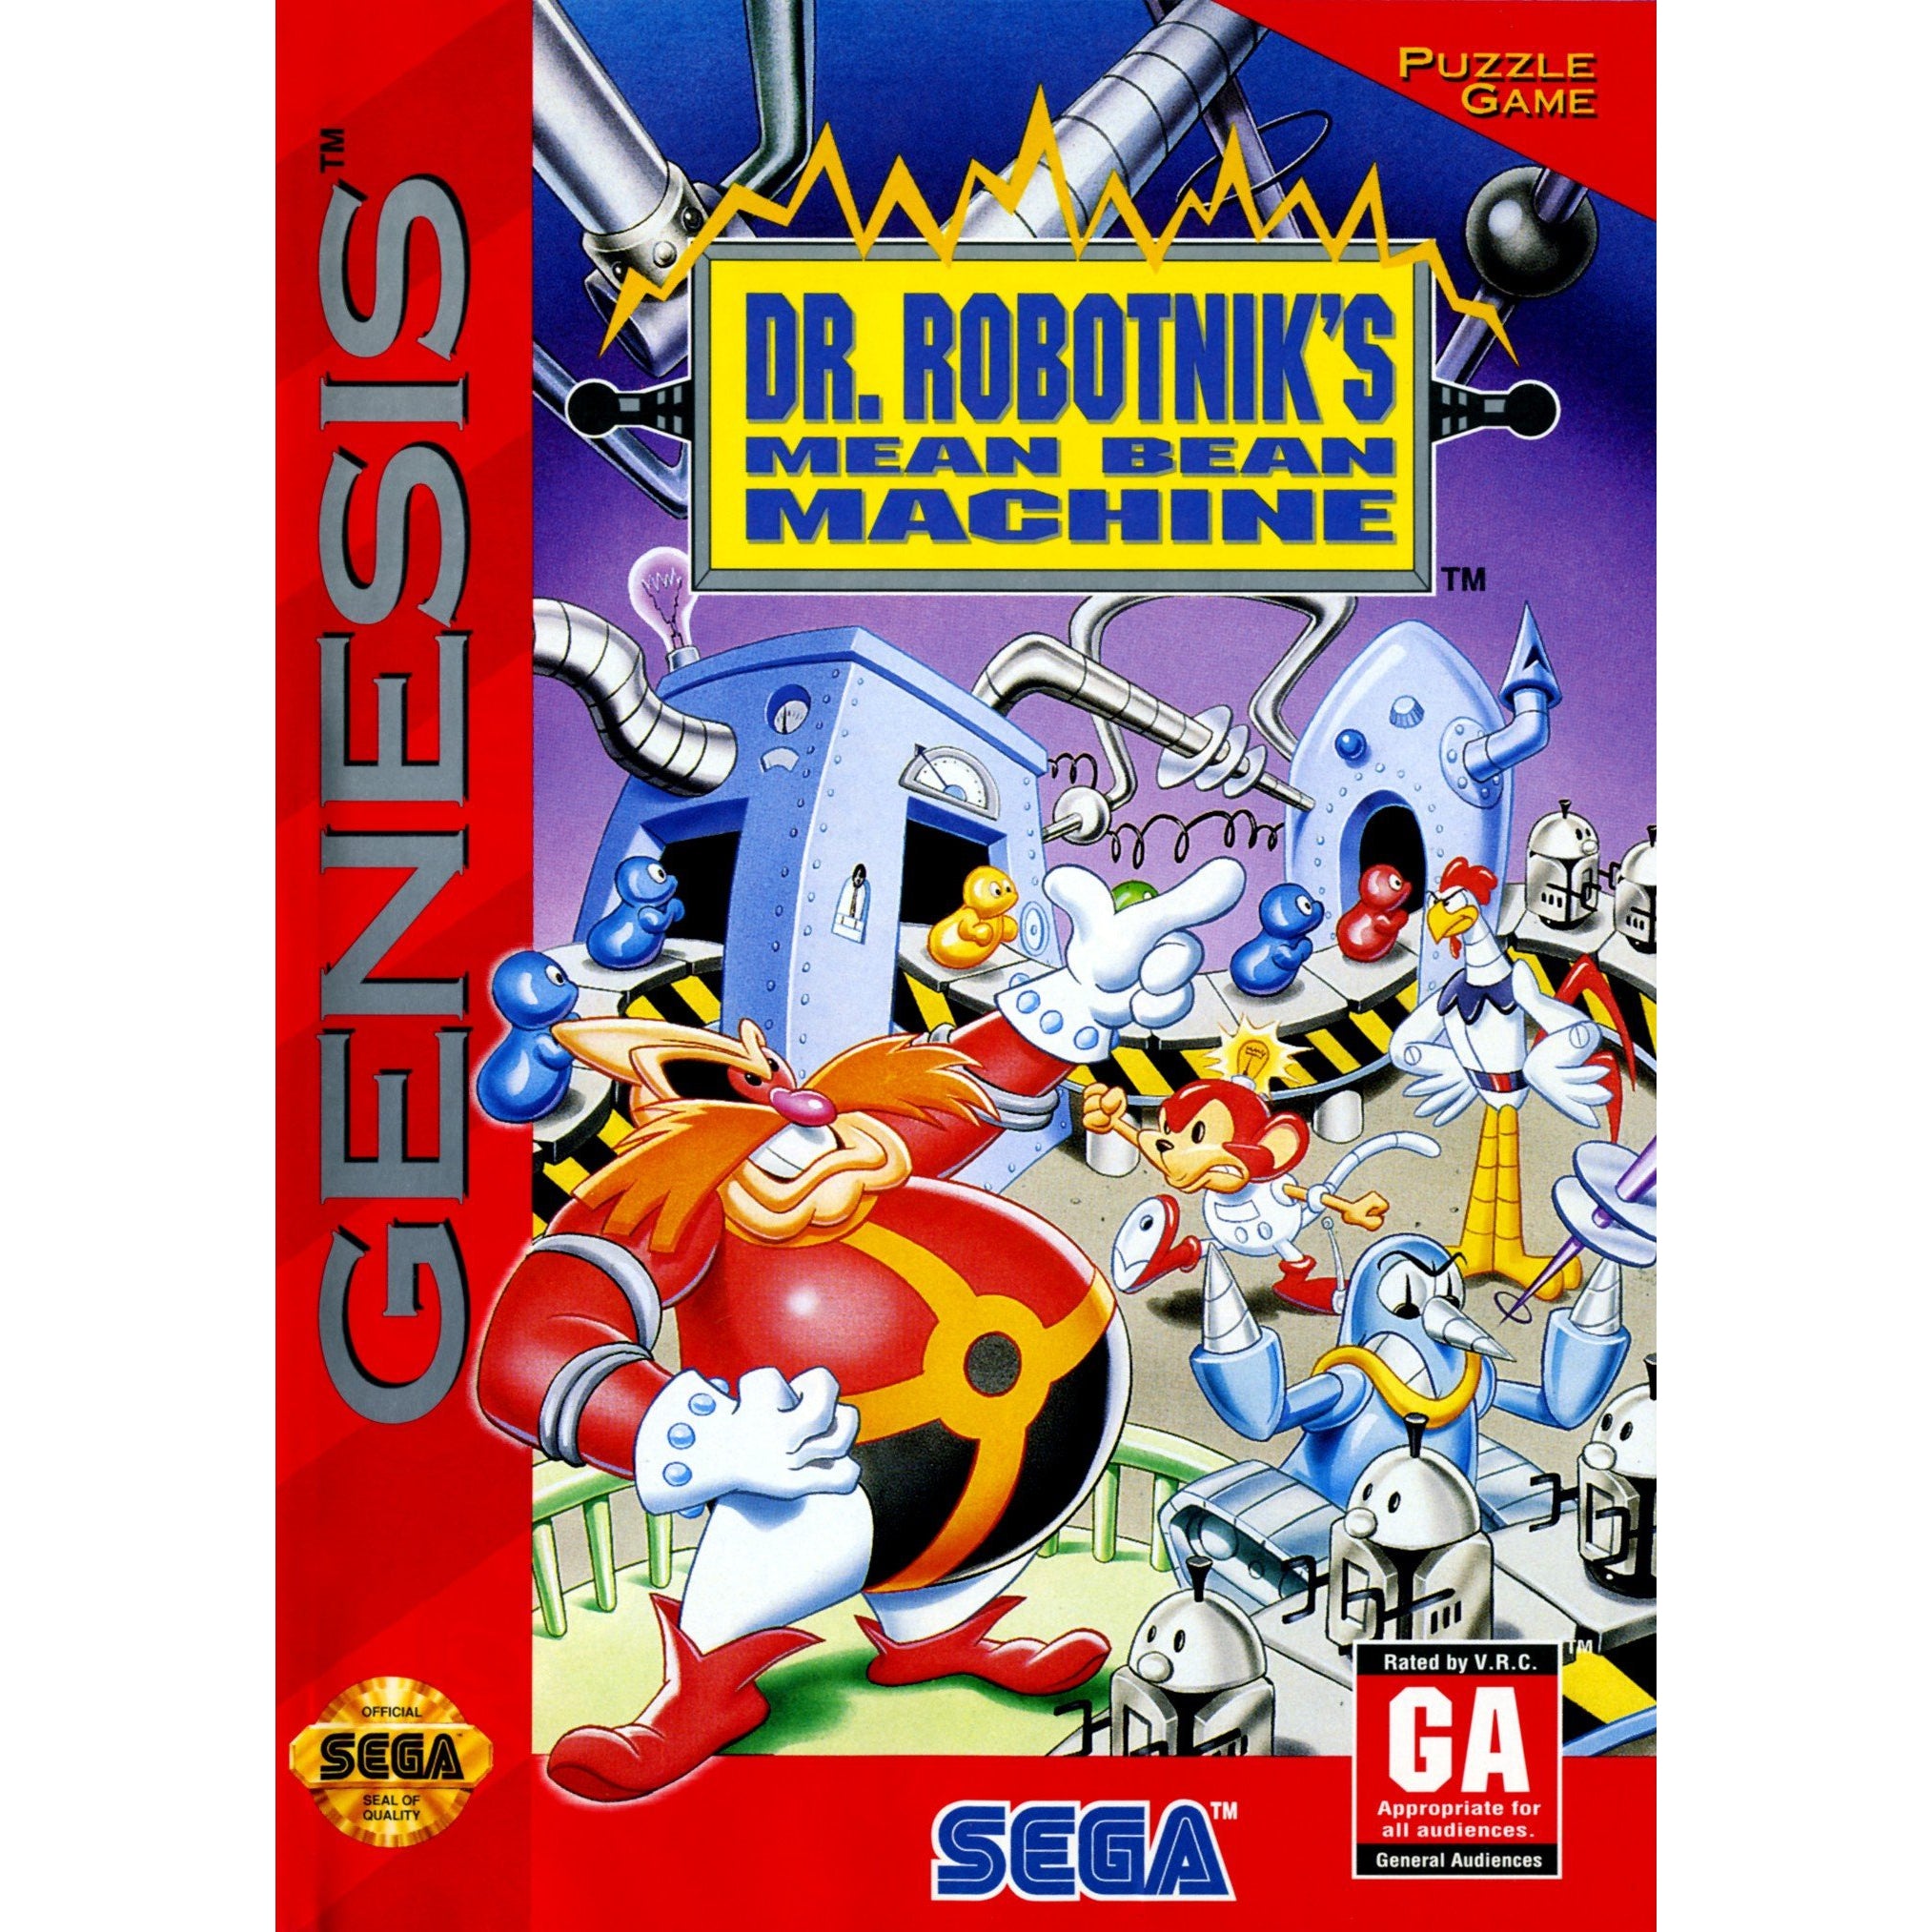 Dr. Robotnik's Mean Bean Machine - Sega Genesis Game Complete - YourGamingShop.com - Buy, Sell, Trade Video Games Online. 120 Day Warranty. Satisfaction Guaranteed.